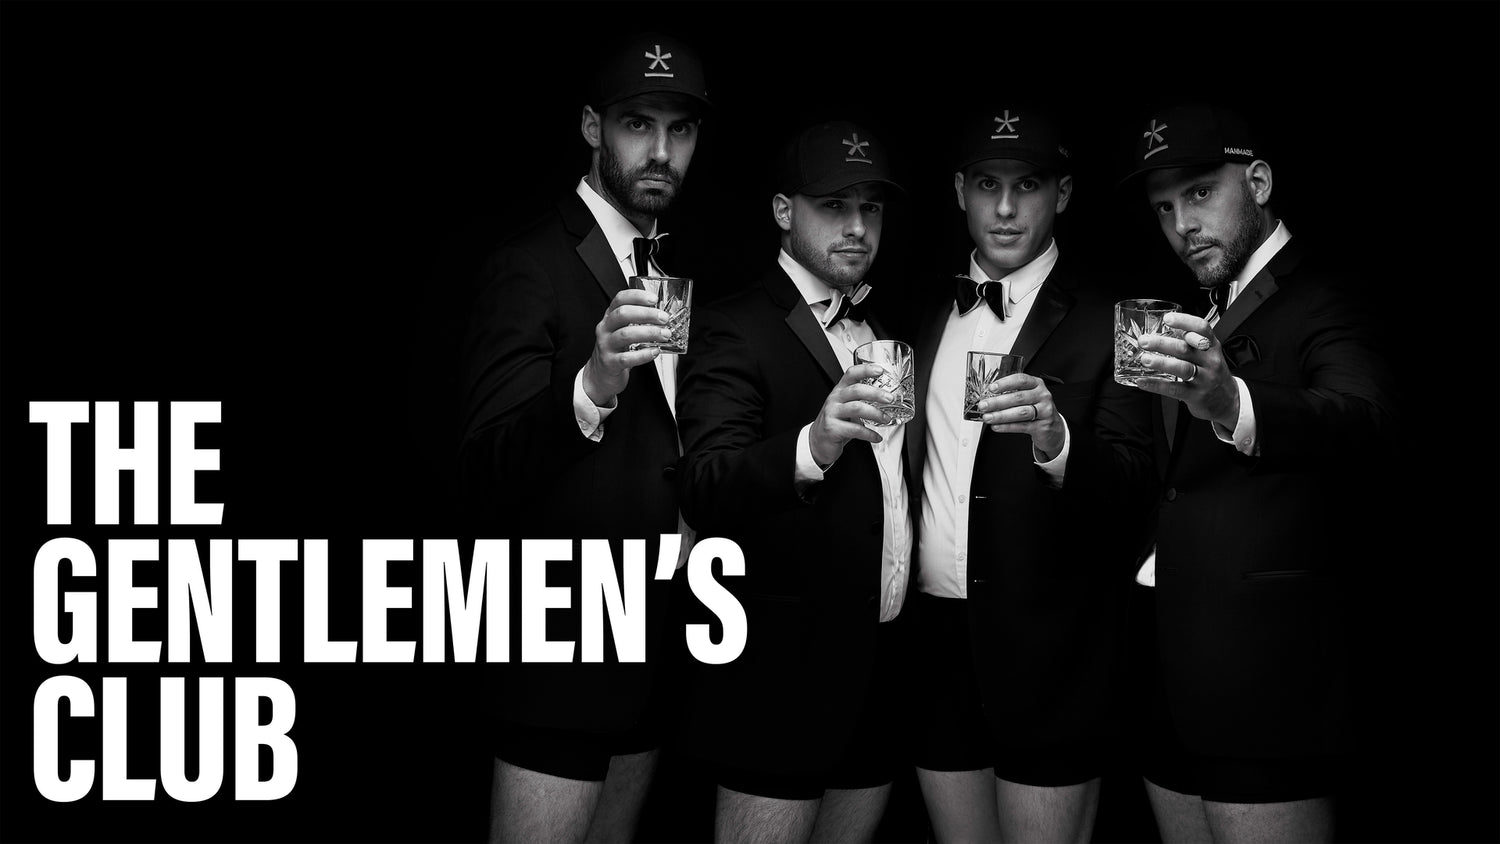 The gentlemen's club: Phil, Rob, Berto and Ant holding a cup of glass on their Manmade boxer brief